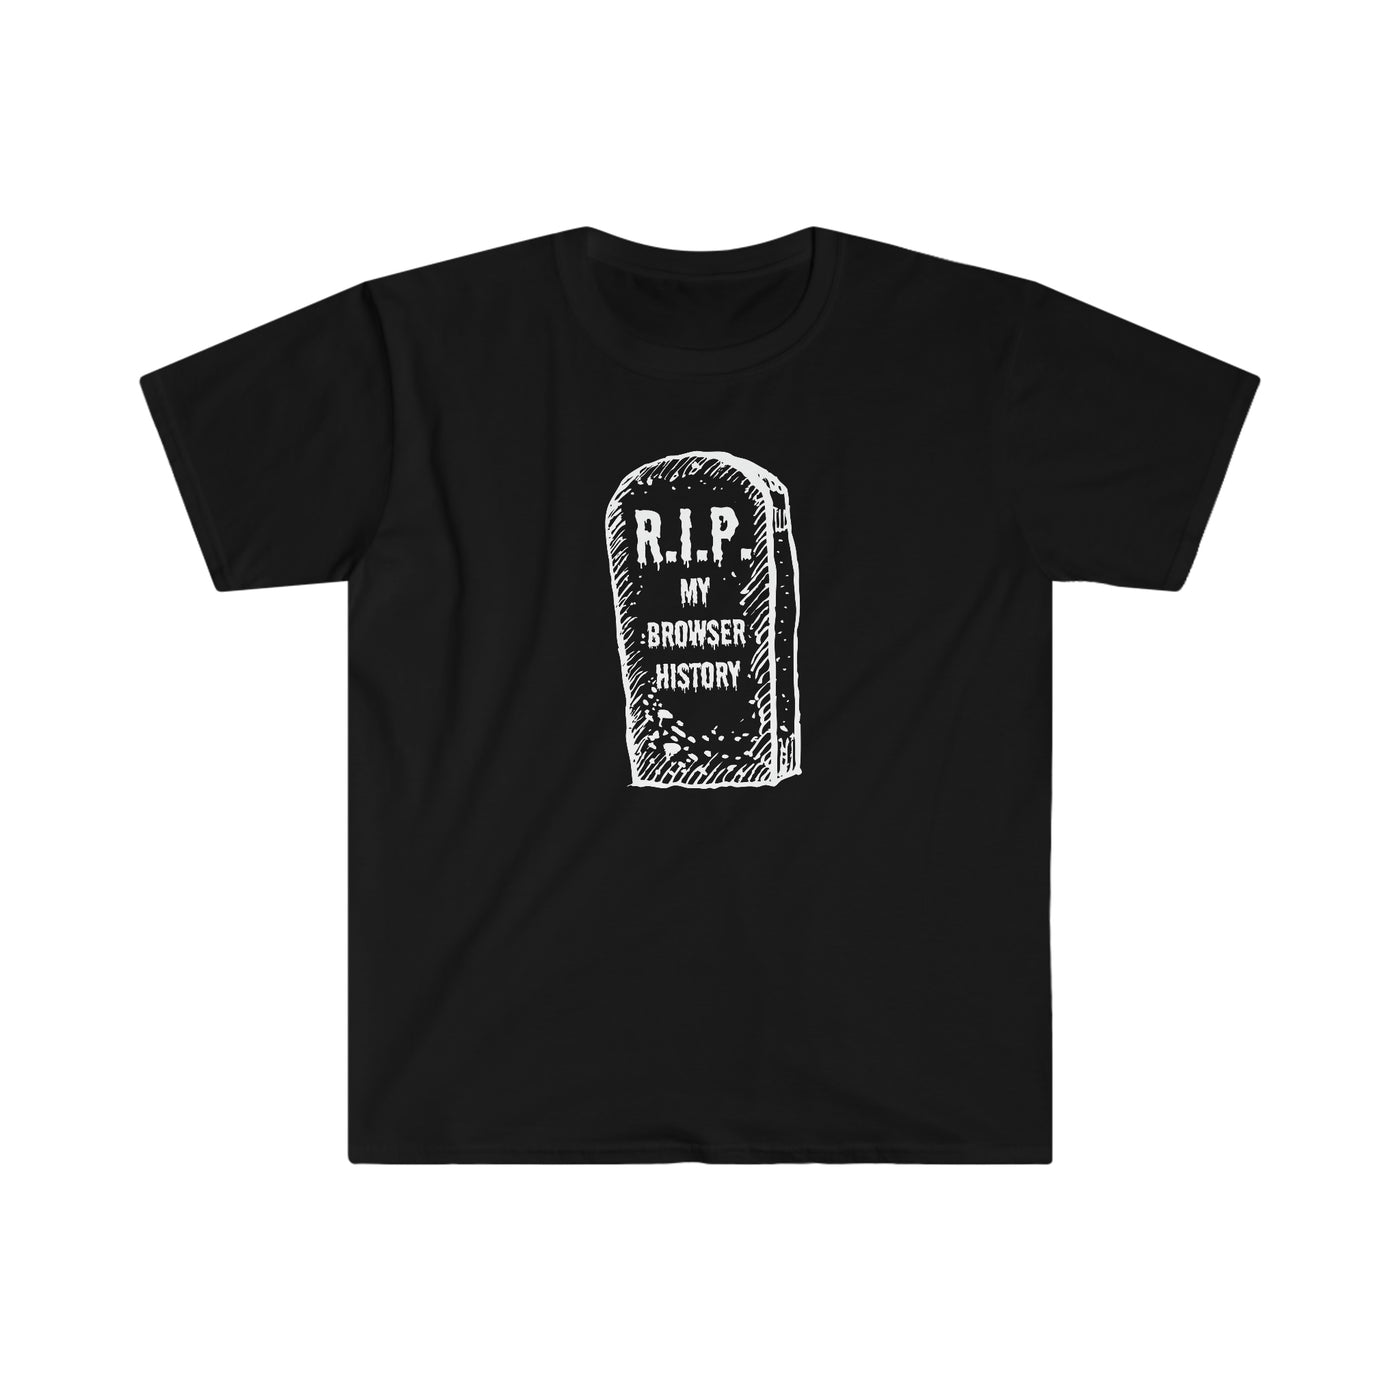 R.I.P. My Browser History Unisex T-Shirt